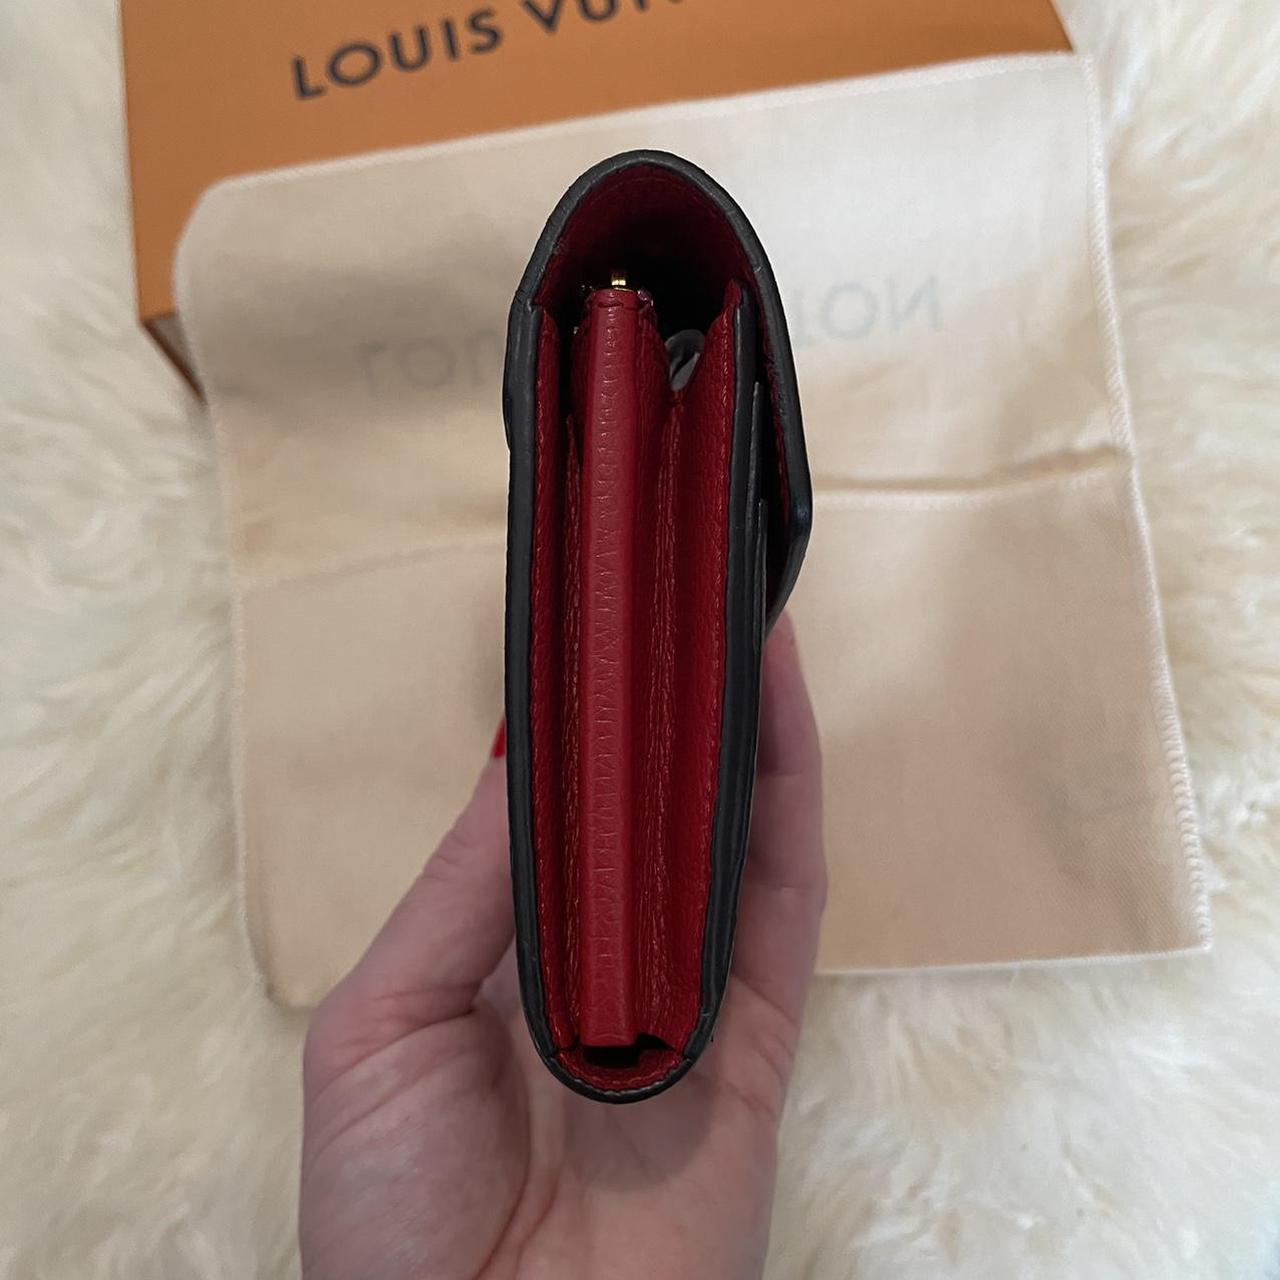 Slightly used Louis Vuitton wallet with the red on - Depop